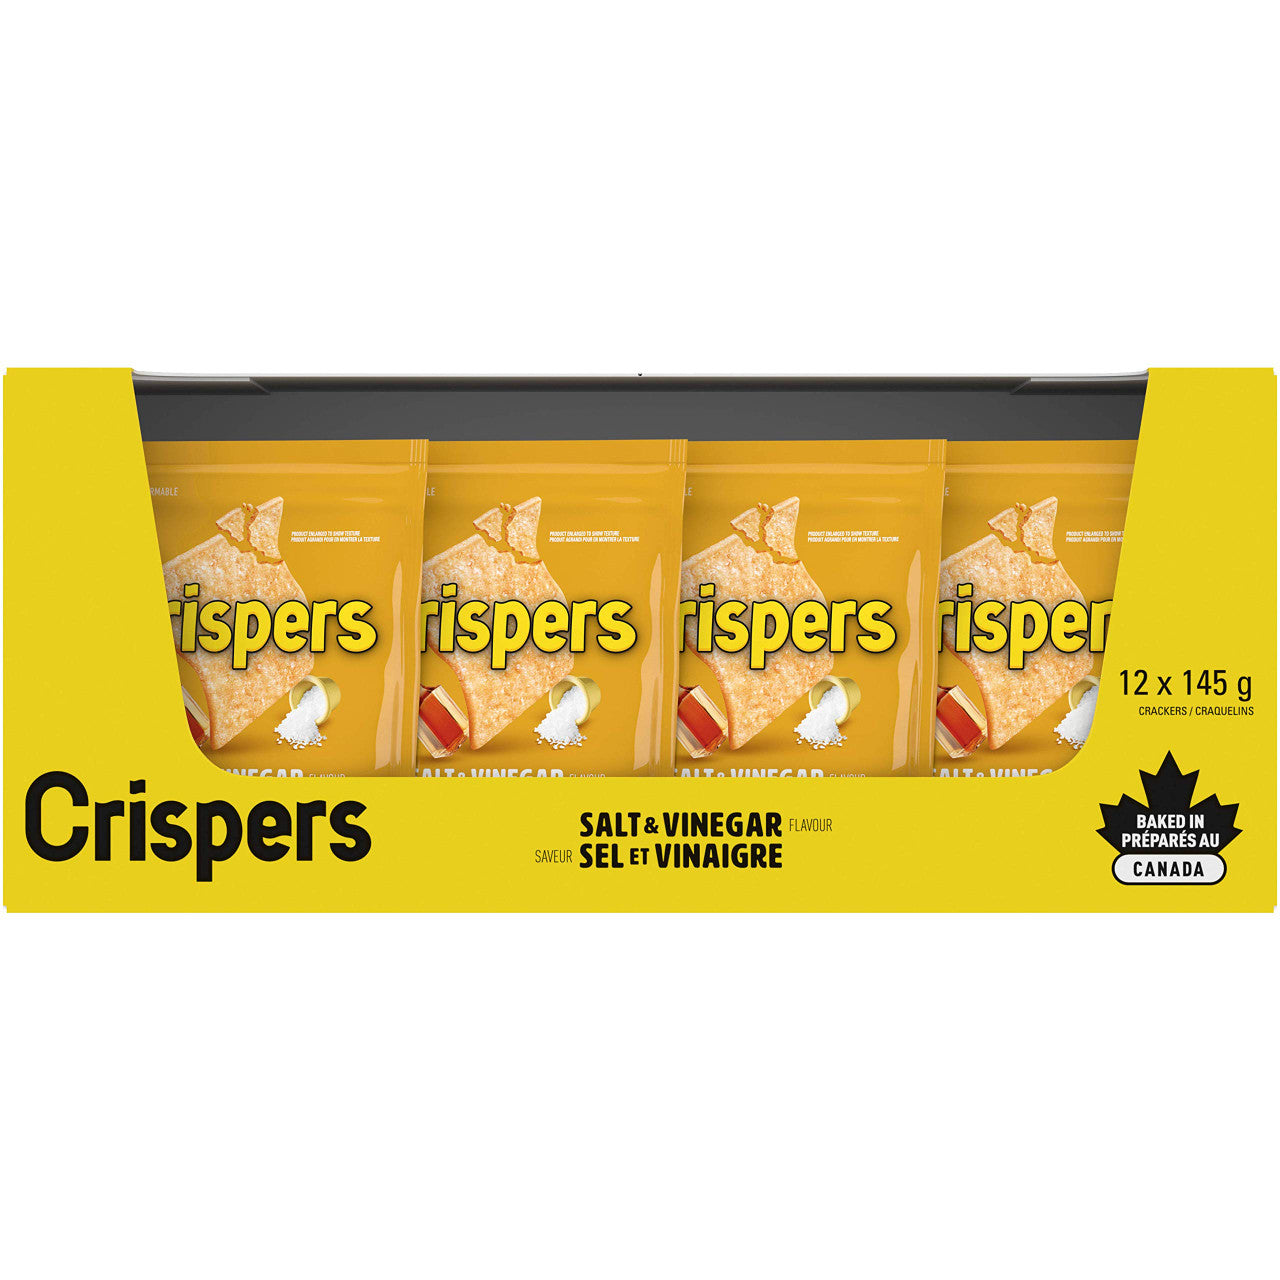 Christie Crispers, Salt & Vinegar Crackers, 145g/5.1 Ounce, (12 Pack), {Imported from Canada}